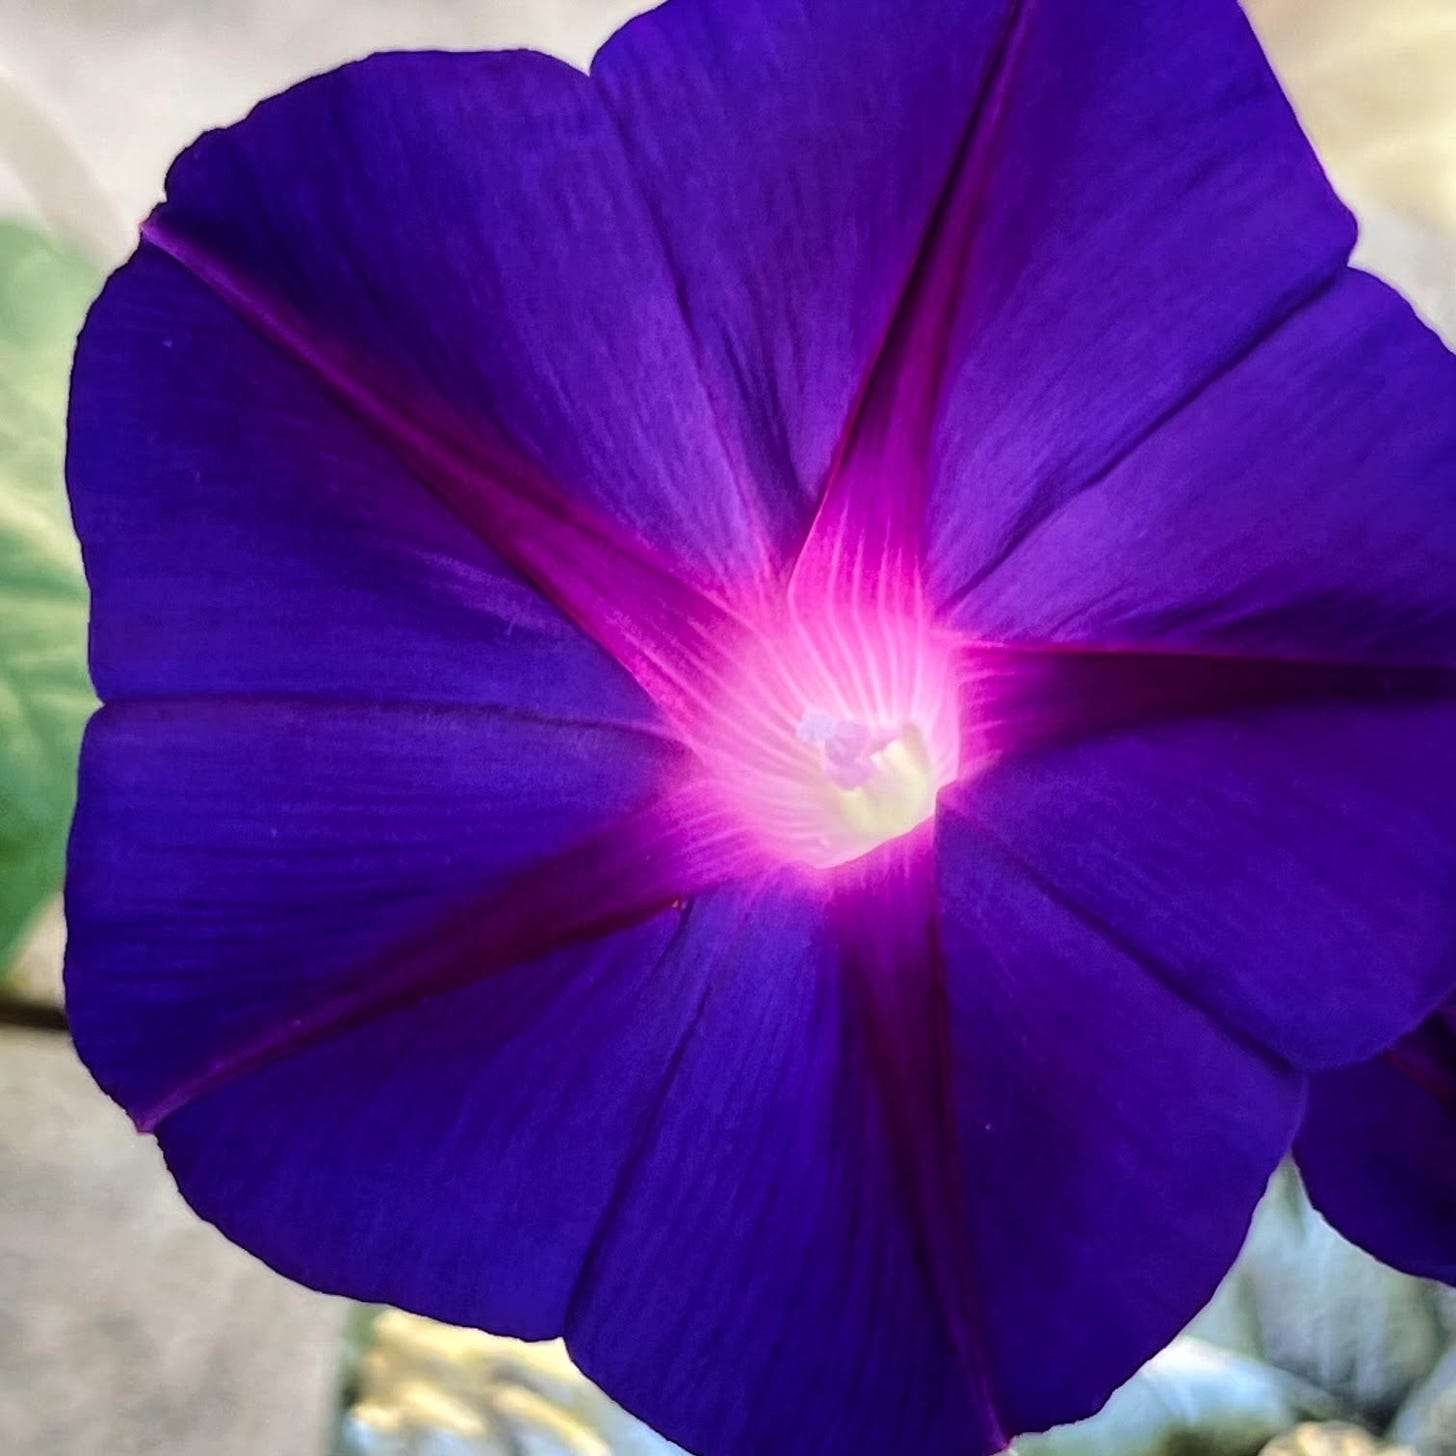 The frame is filled with a dark blue morning glory blossom with a bright pink and white center.